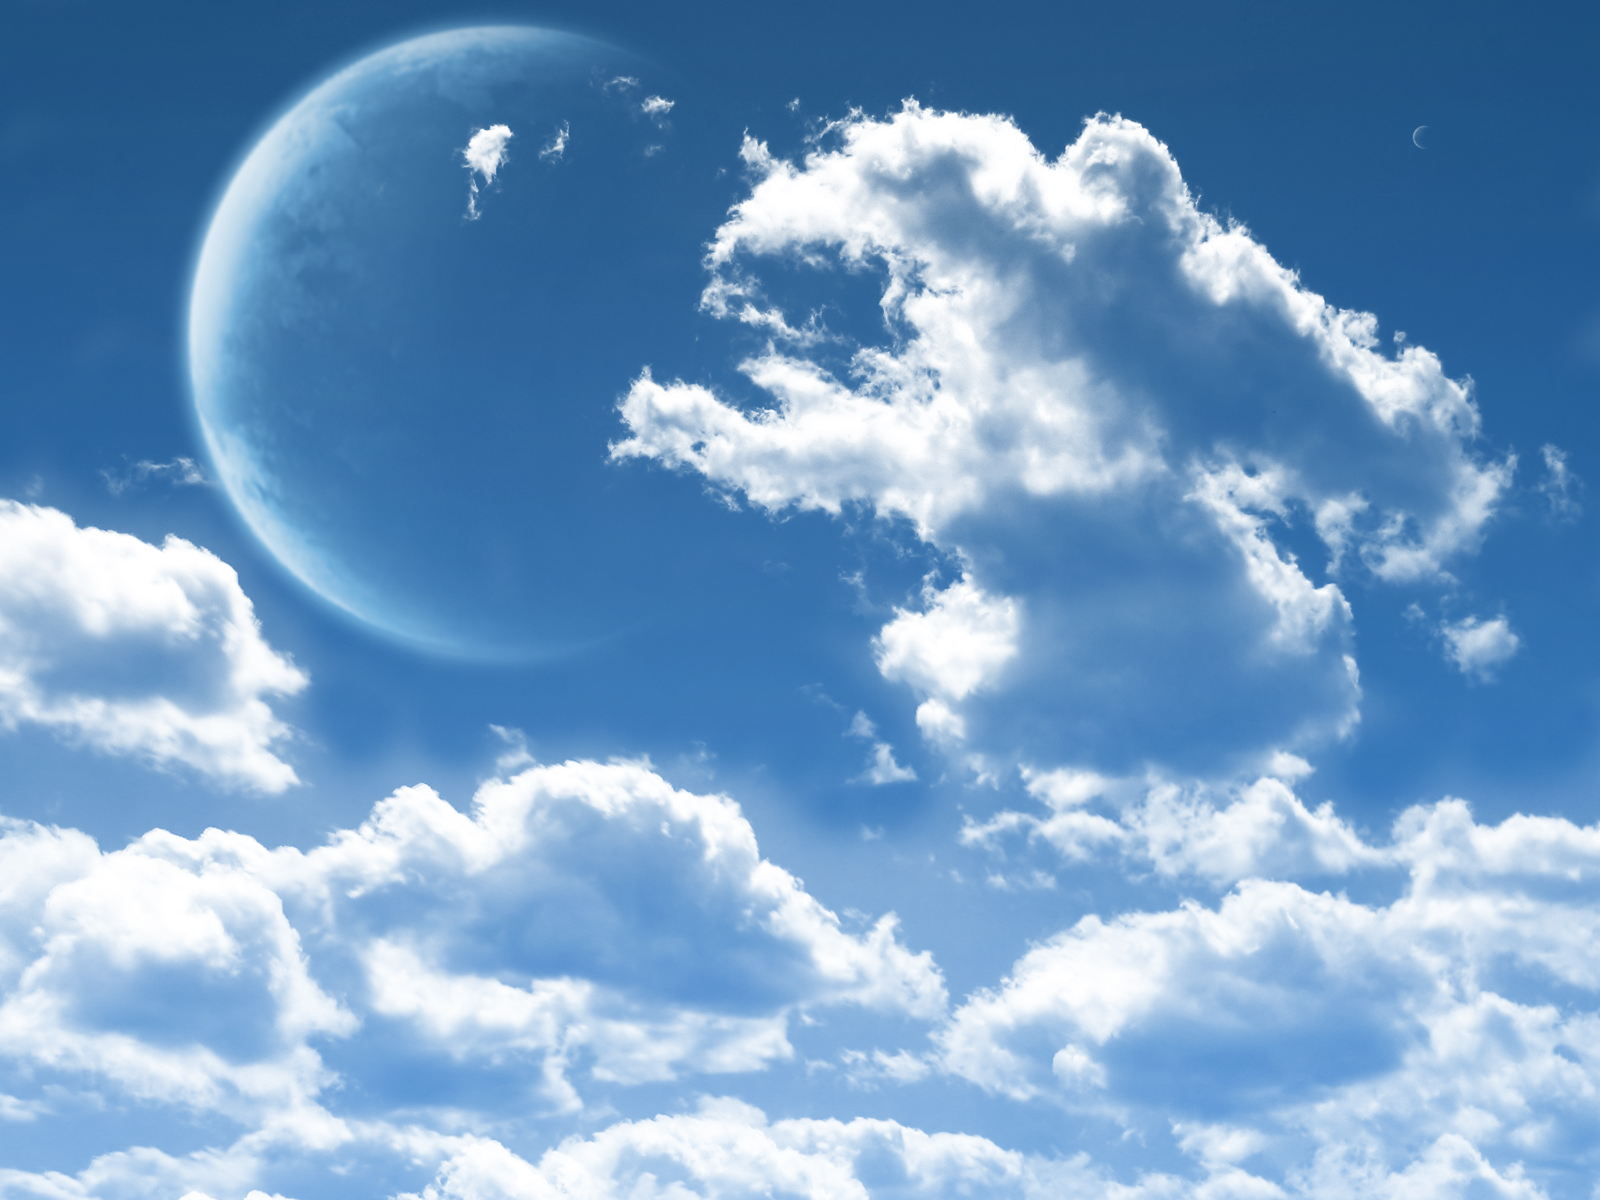 Moon Clouds image